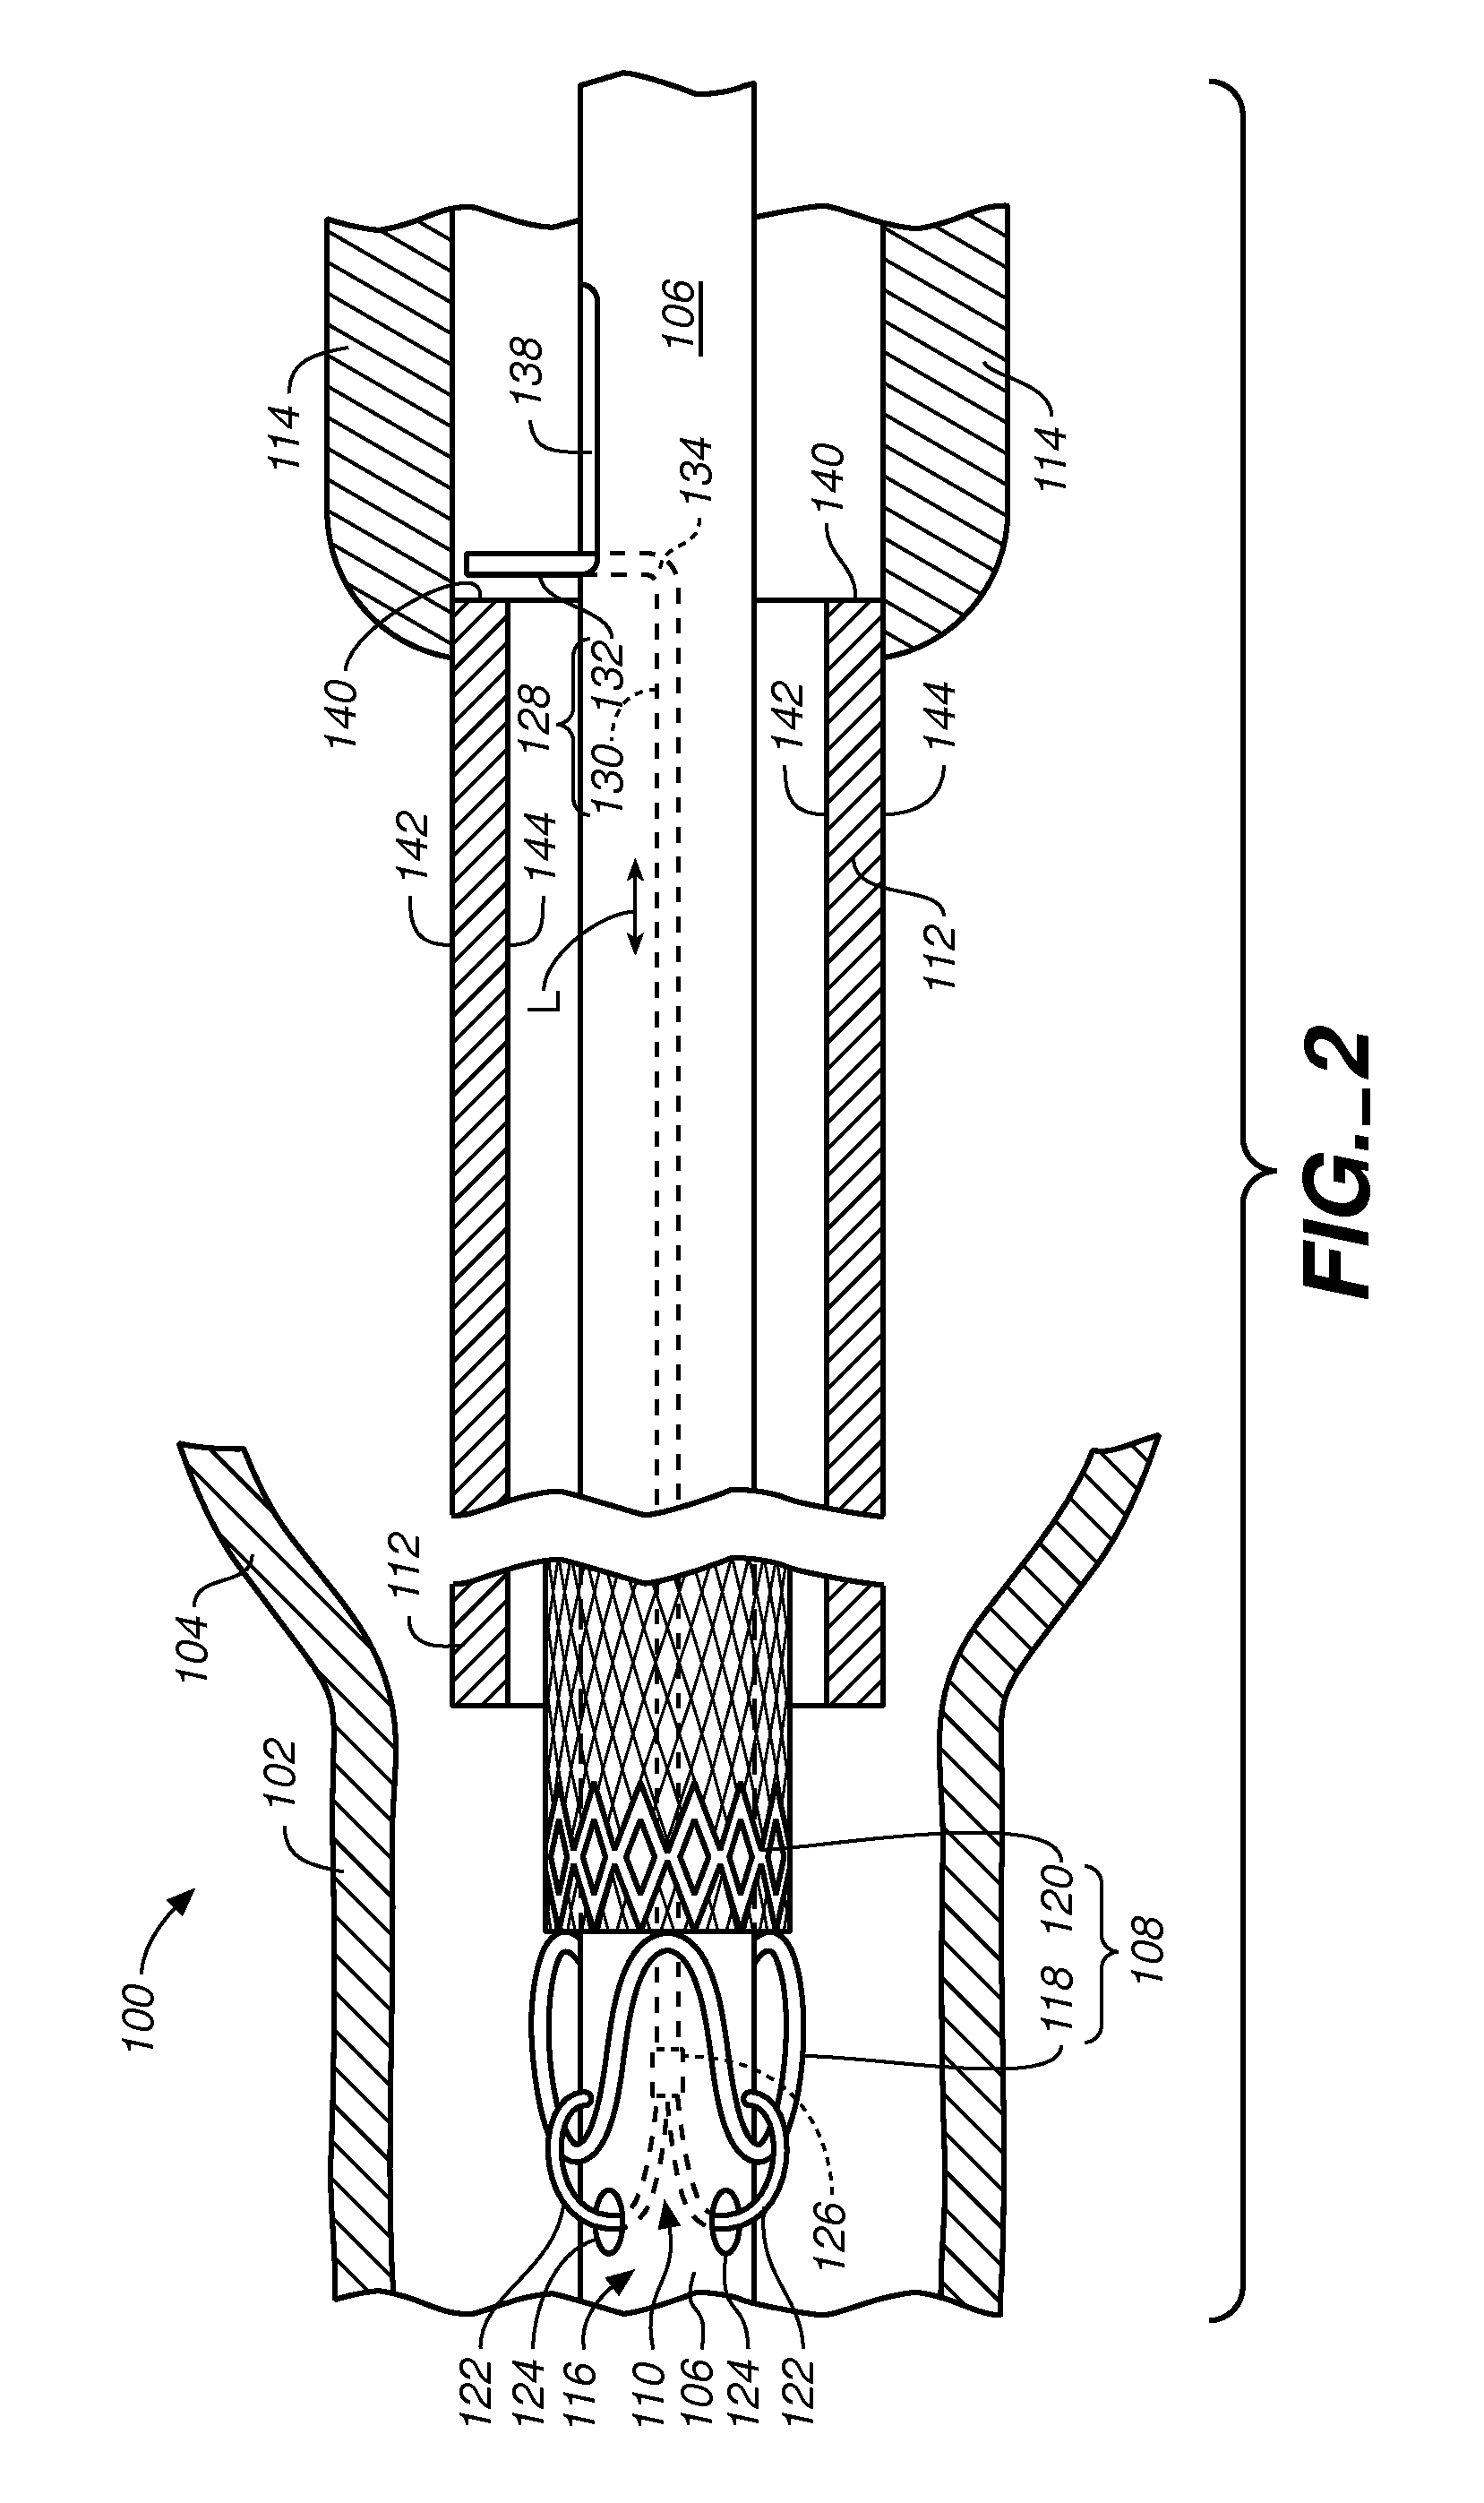 Stent-Graft Delivery System